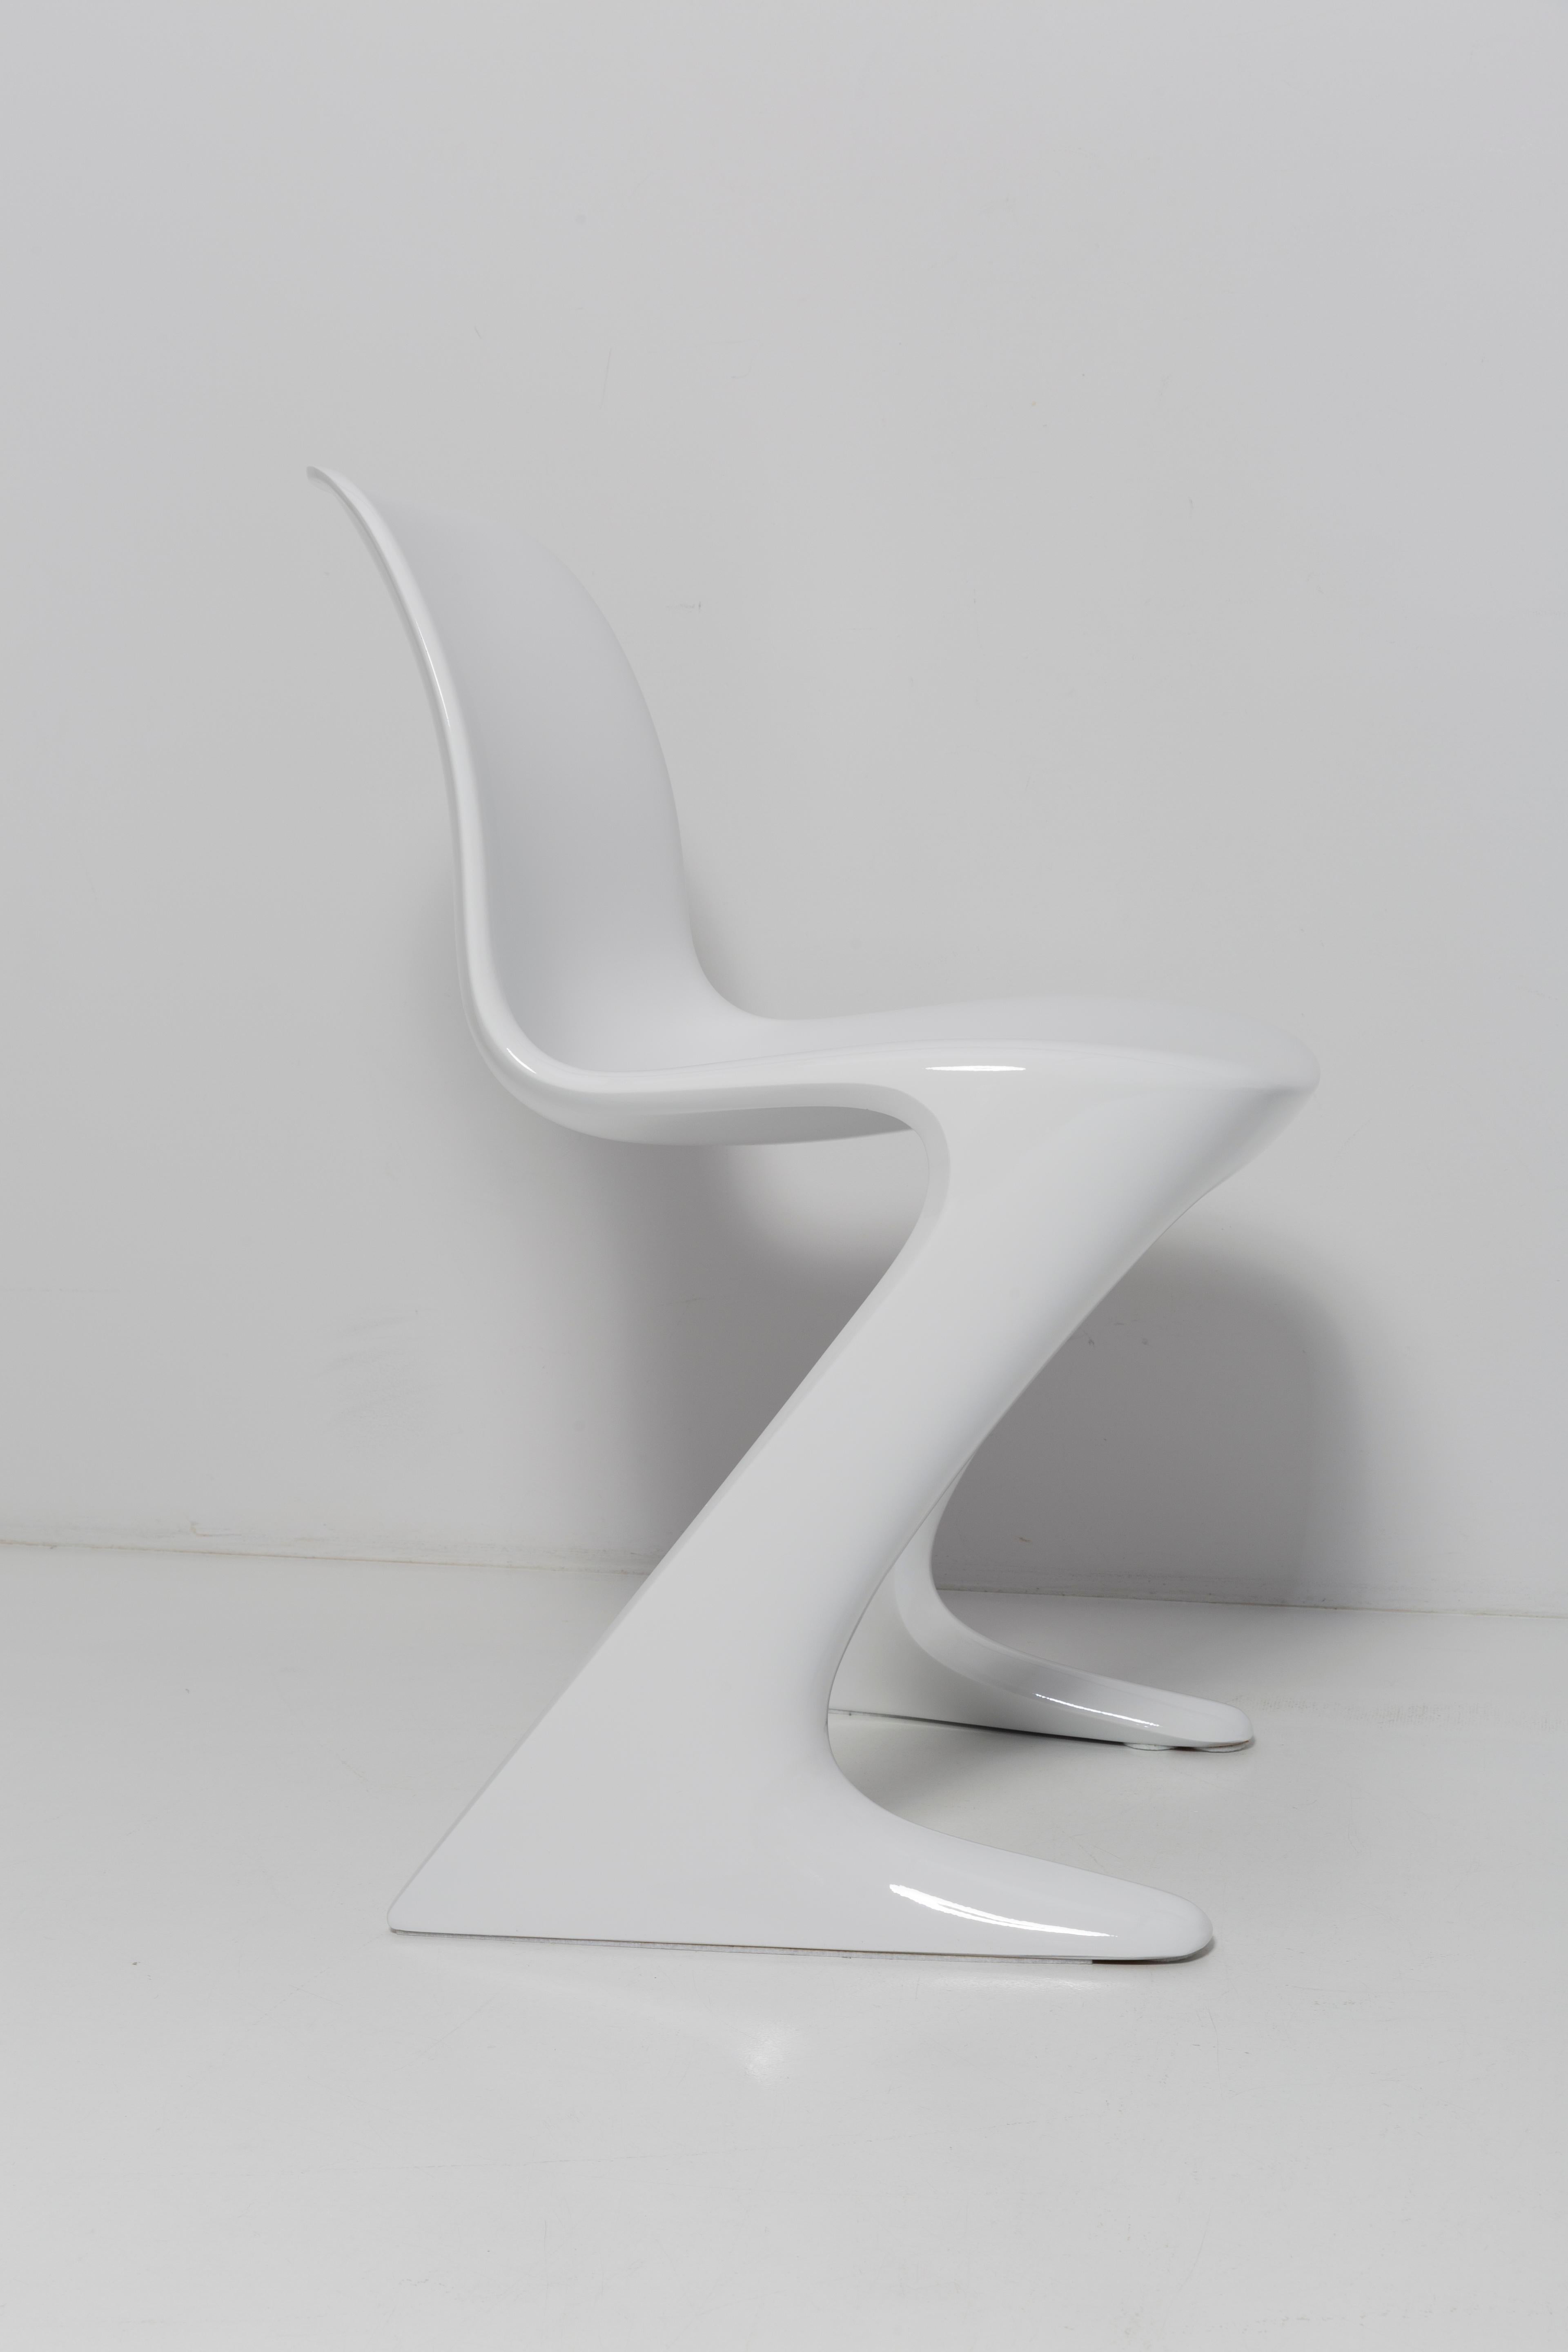 20th Century White Glossy Kangaroo Chair Designed by Ernst Moeckl, Germany, 1960s For Sale